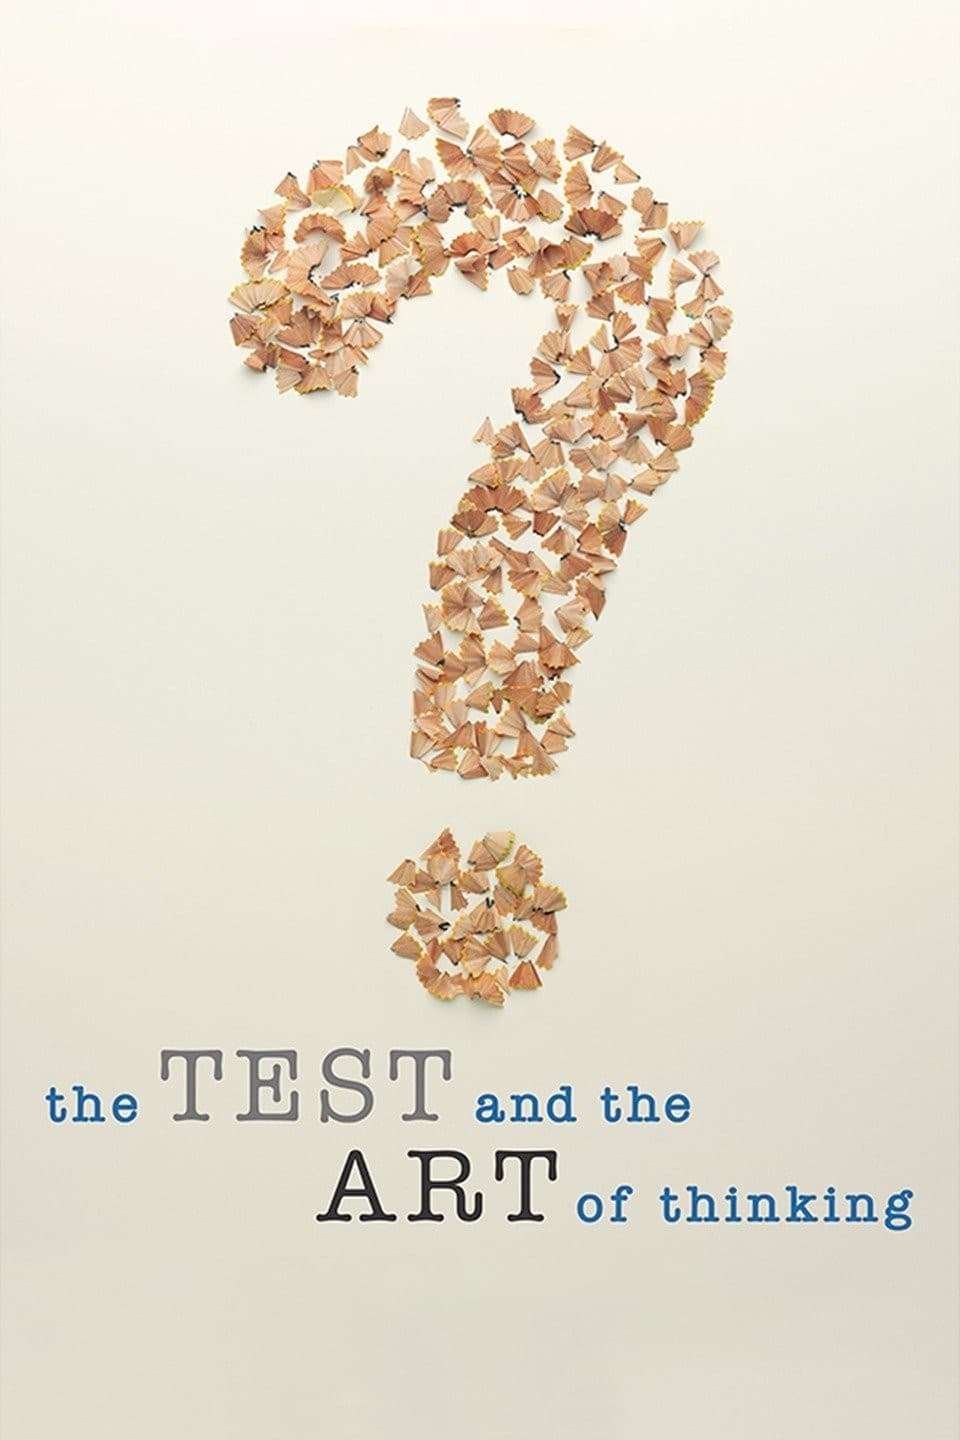 The Test and the Art of Thinking